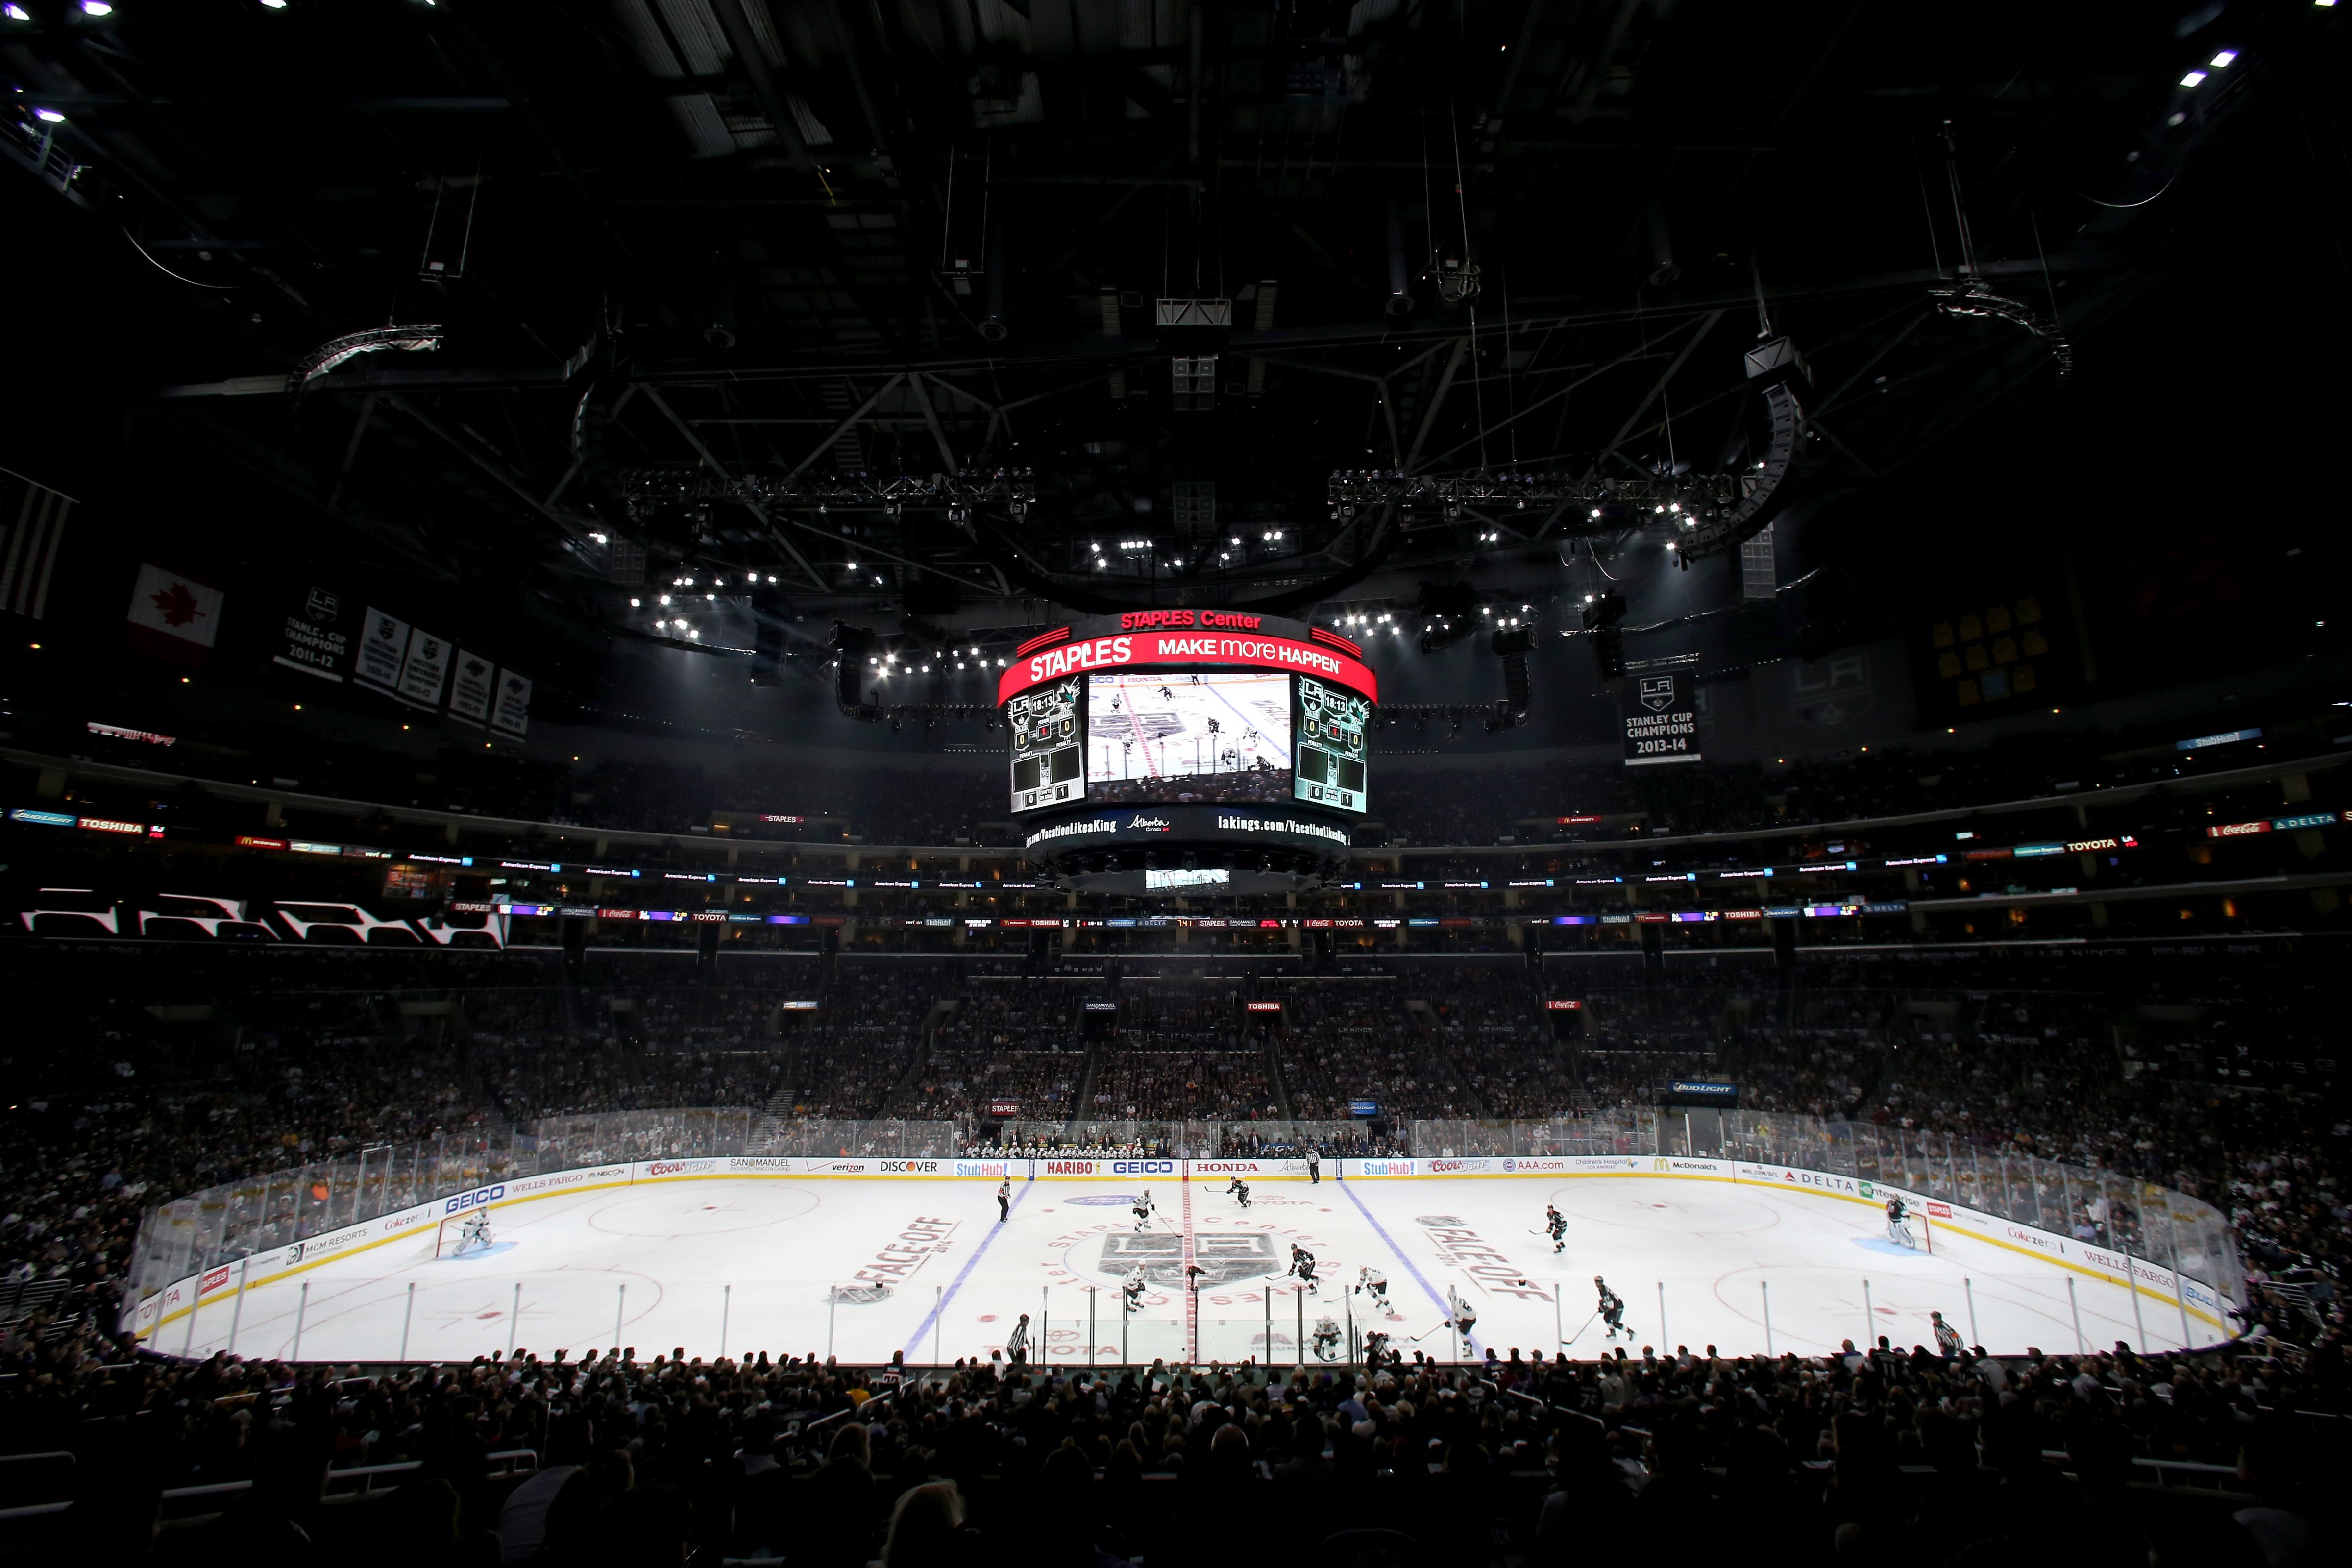 An overall view of the interior of the arena at the NHL season opener at Staples Center on October 8, 2014 in Los Angeles, California. (Stephen Dunn—Getty Images)